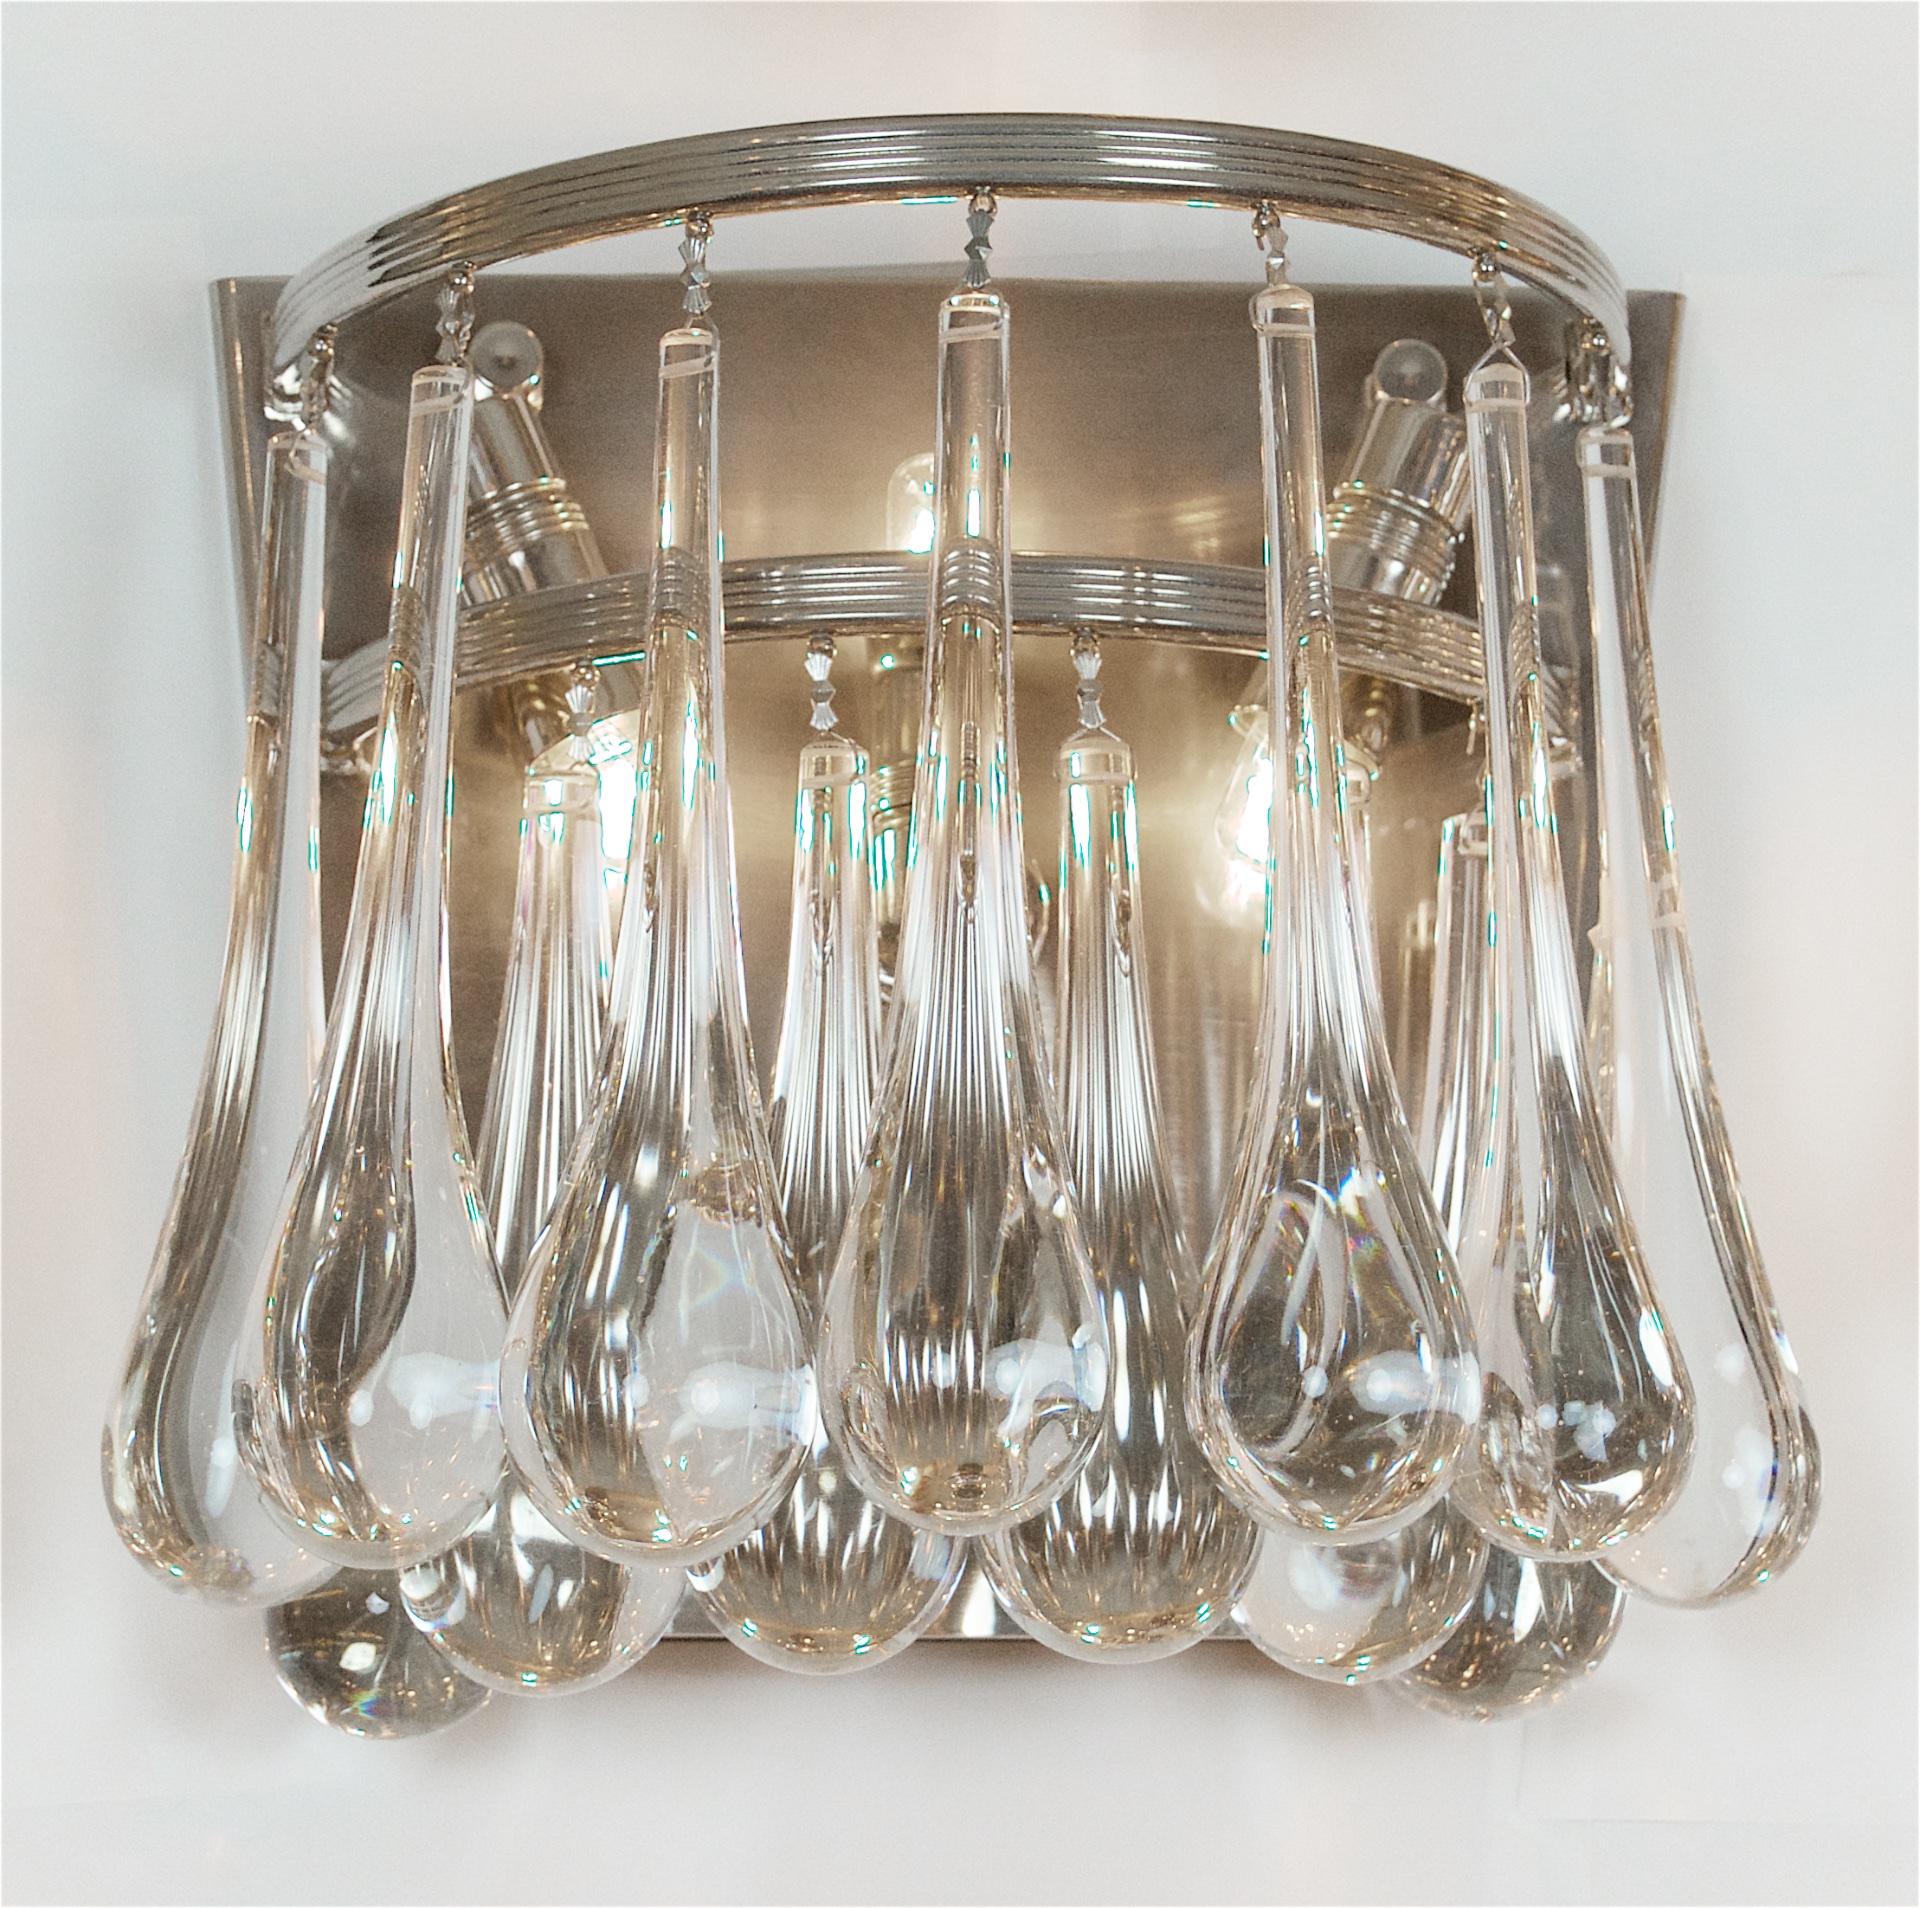 Elegant sconces by Cristoph Palme with substantial, heavy crystal teardrops. Sconces can be hung in either format shown.

Takes three E-14 base bulbs per sconce up to 40 watts per bulb, new wiring.

Price listed is per pair.